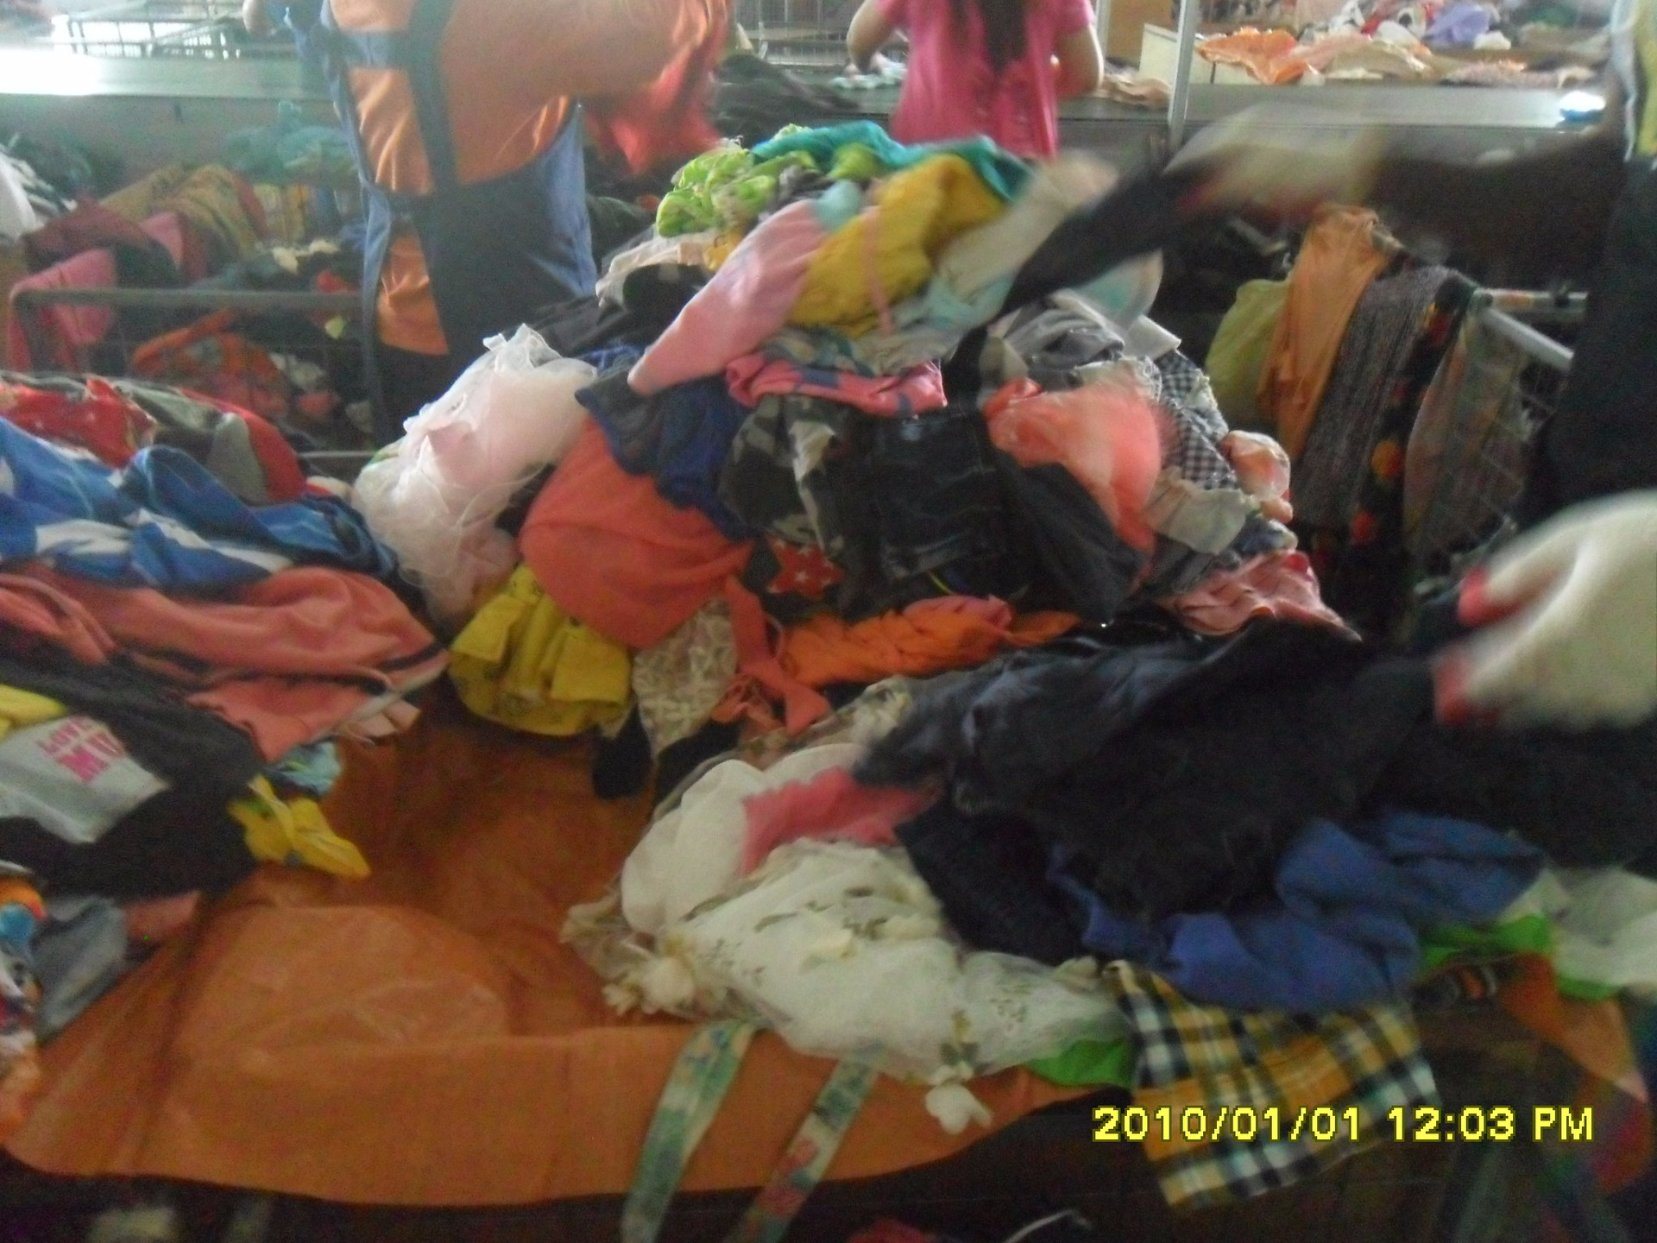 Wholesale Summer Used Clothes Clothing and Shoes